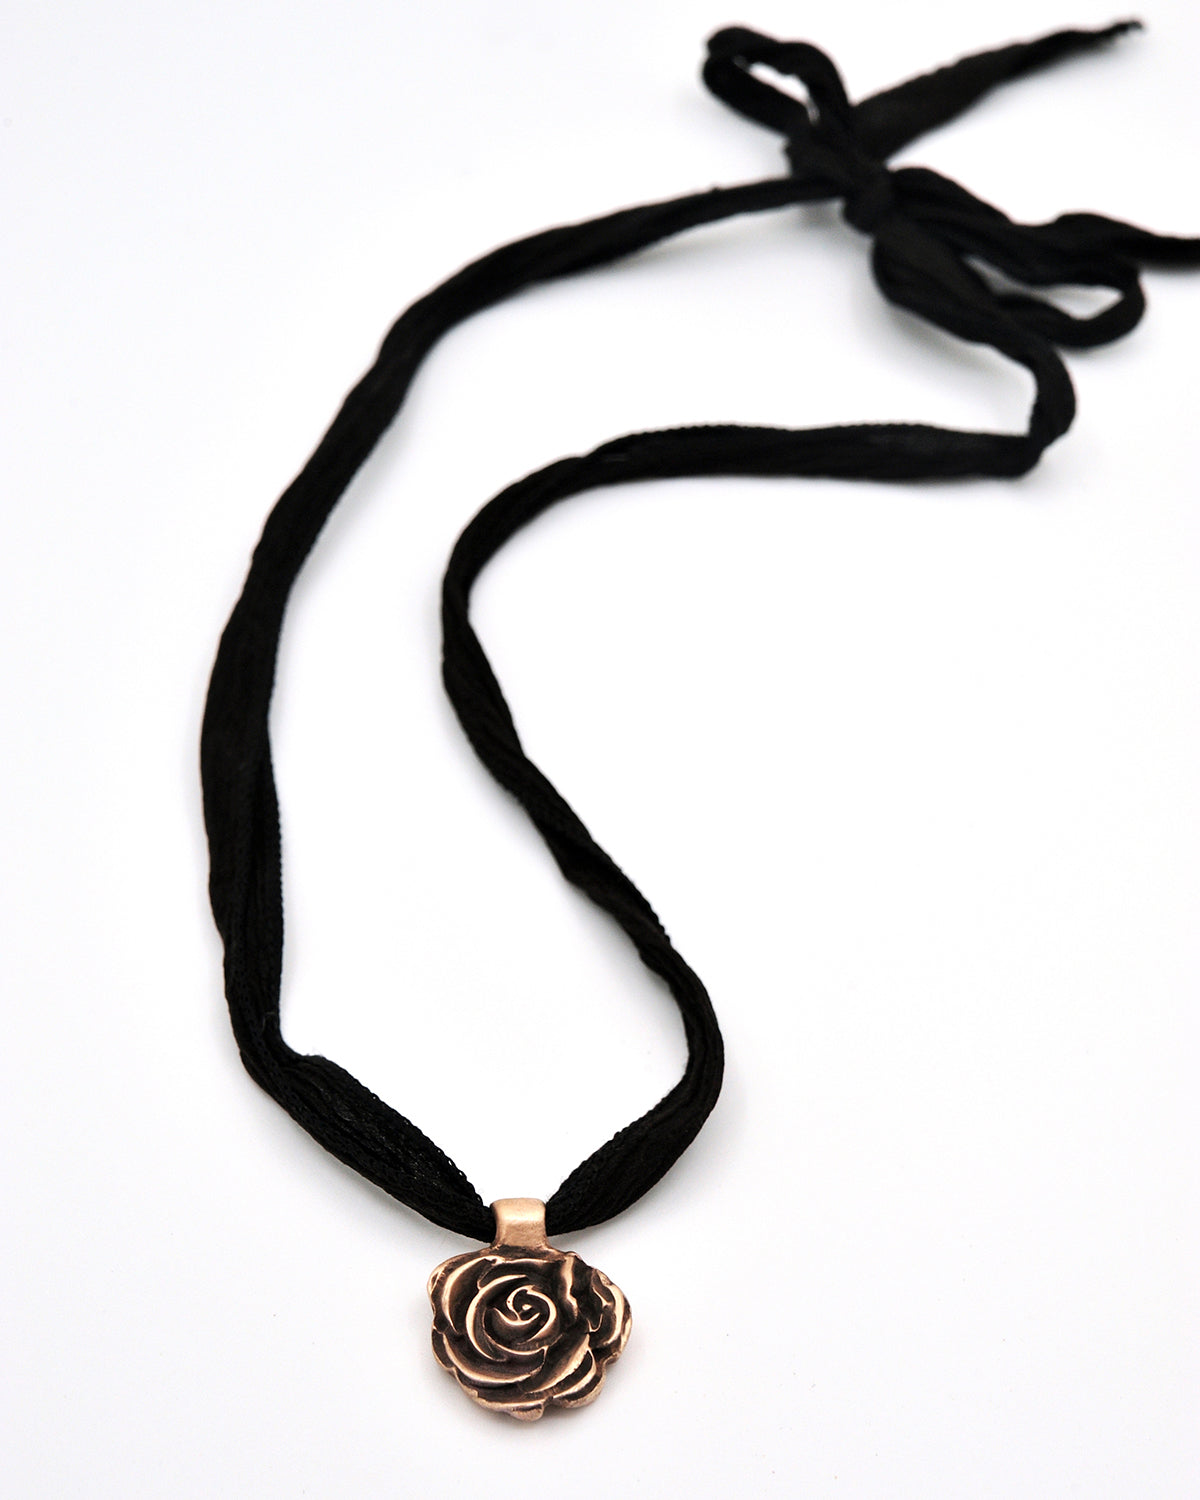 Handcrafted Bronze Rose Pendant Necklace on Silk Cording